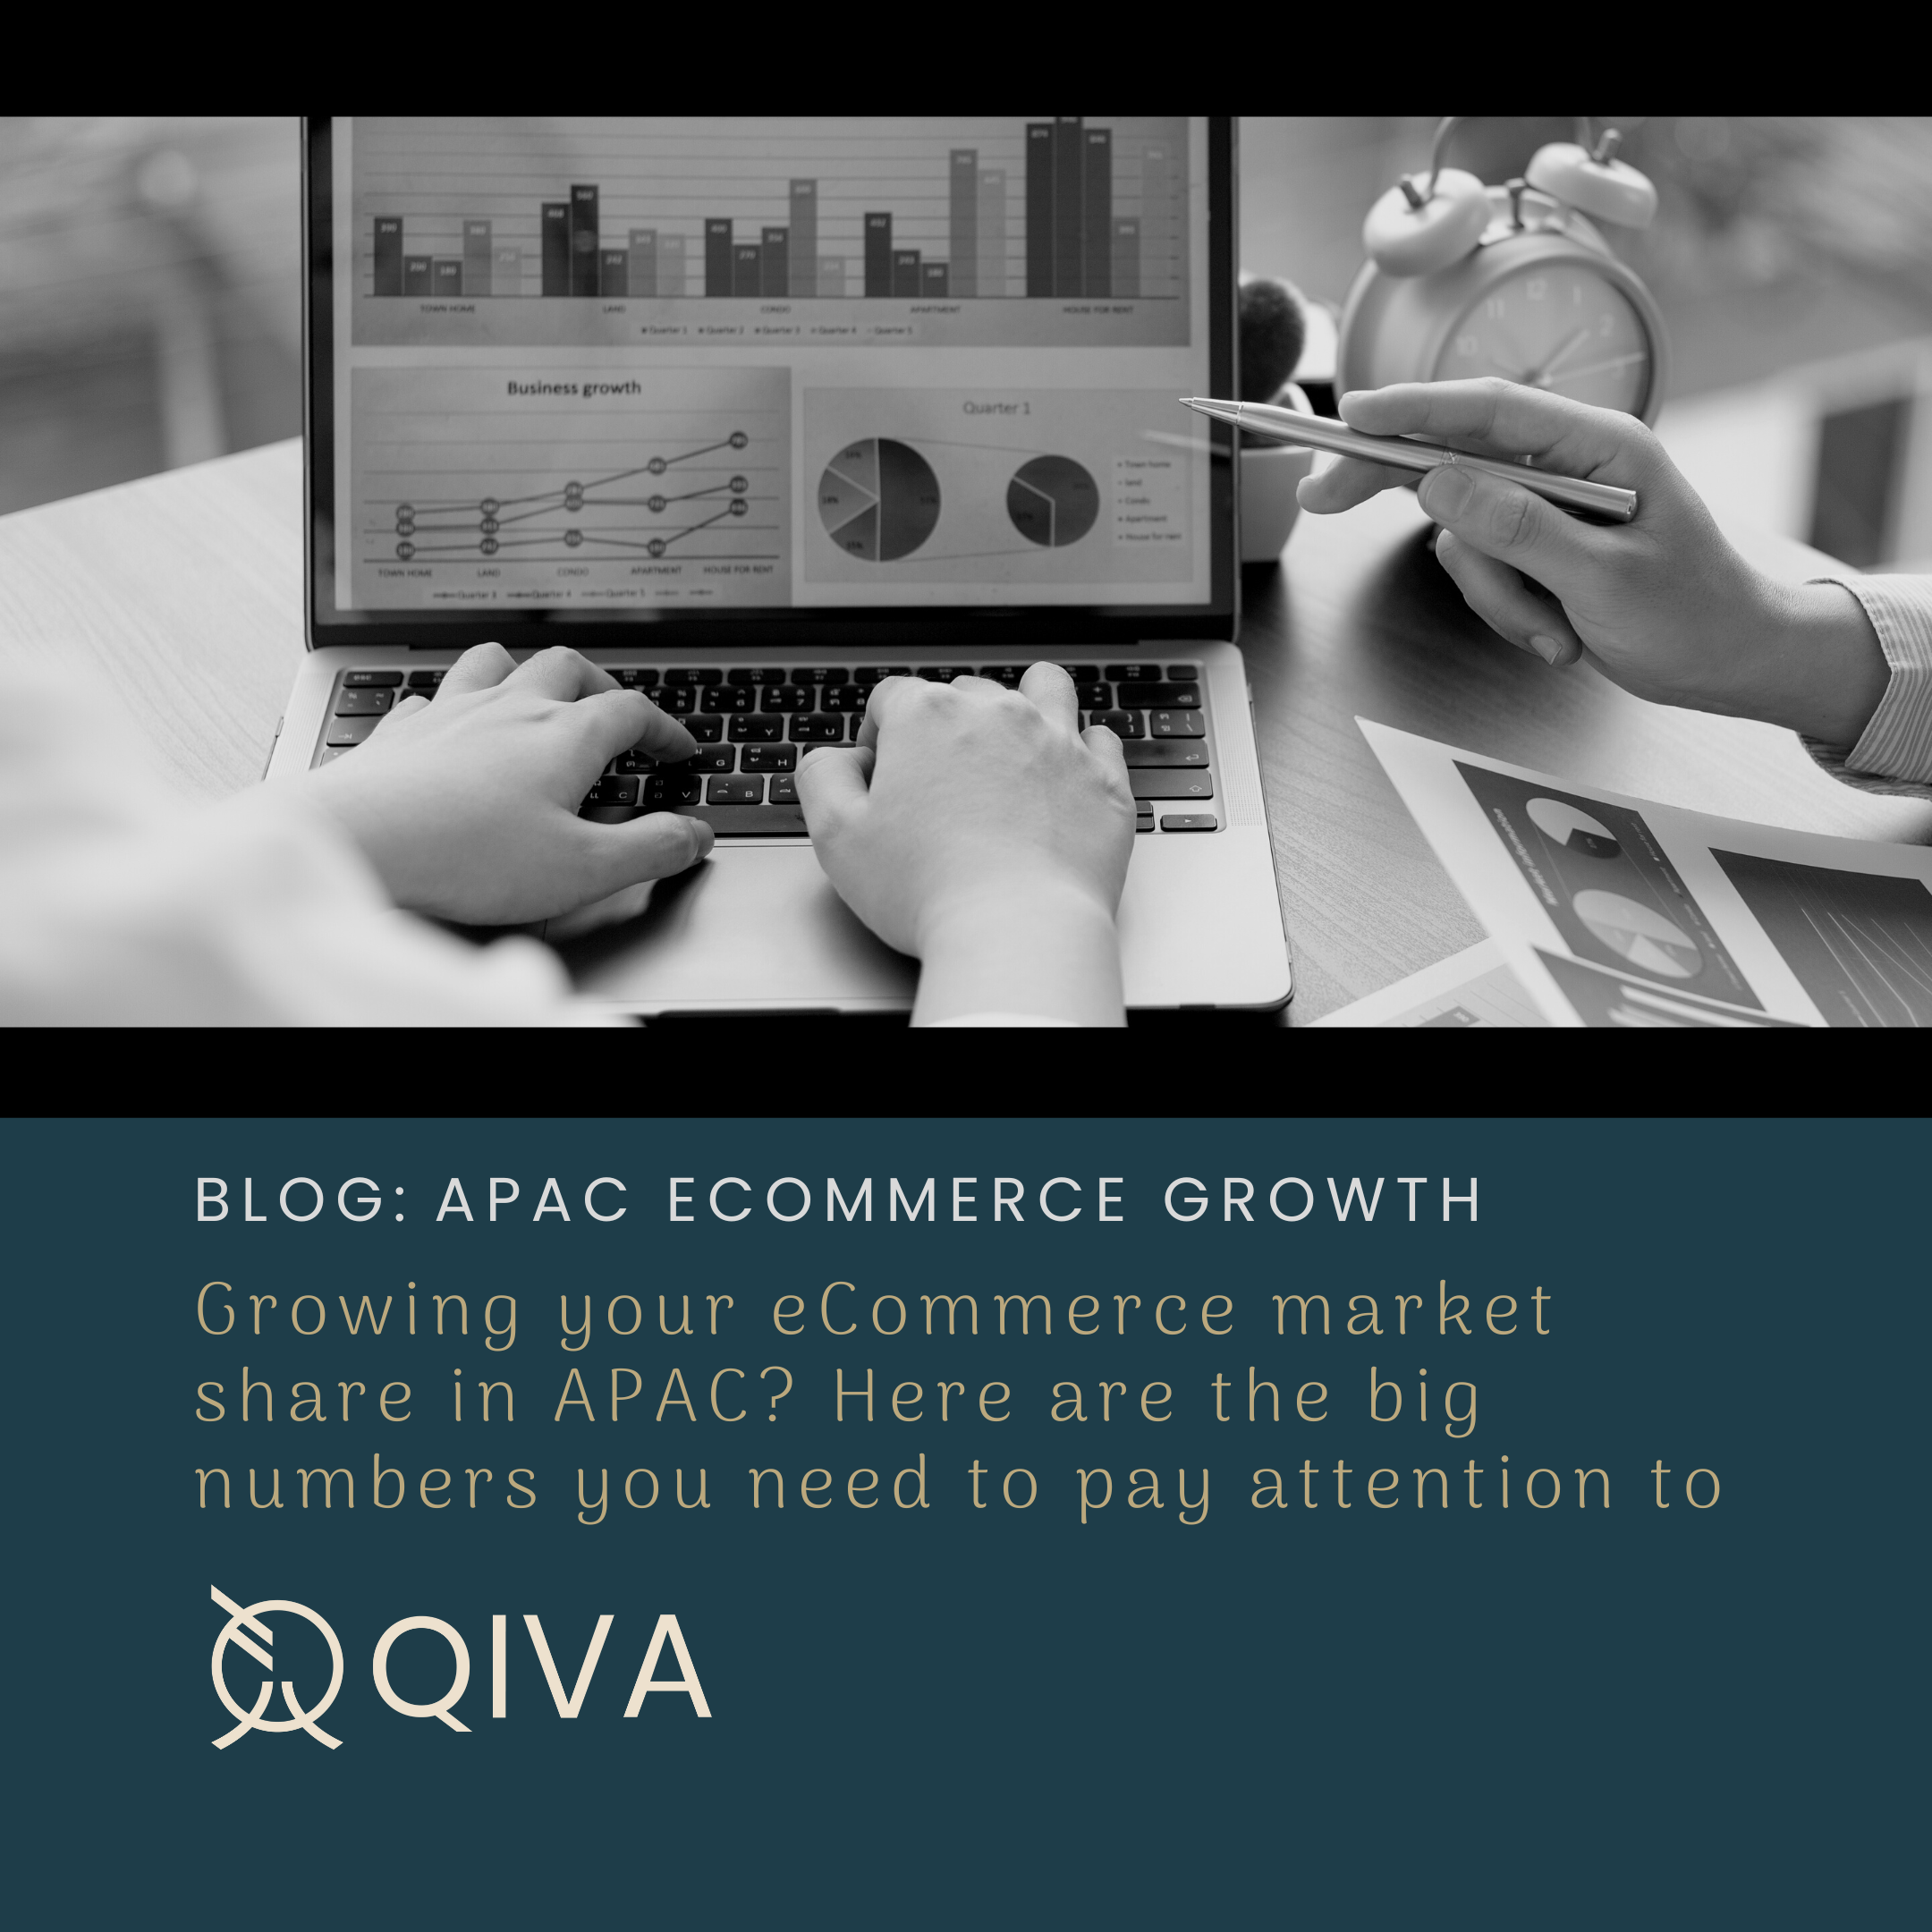 Growing your eCommerce market share in APAC? Here are the big numbers you need to pay attention to